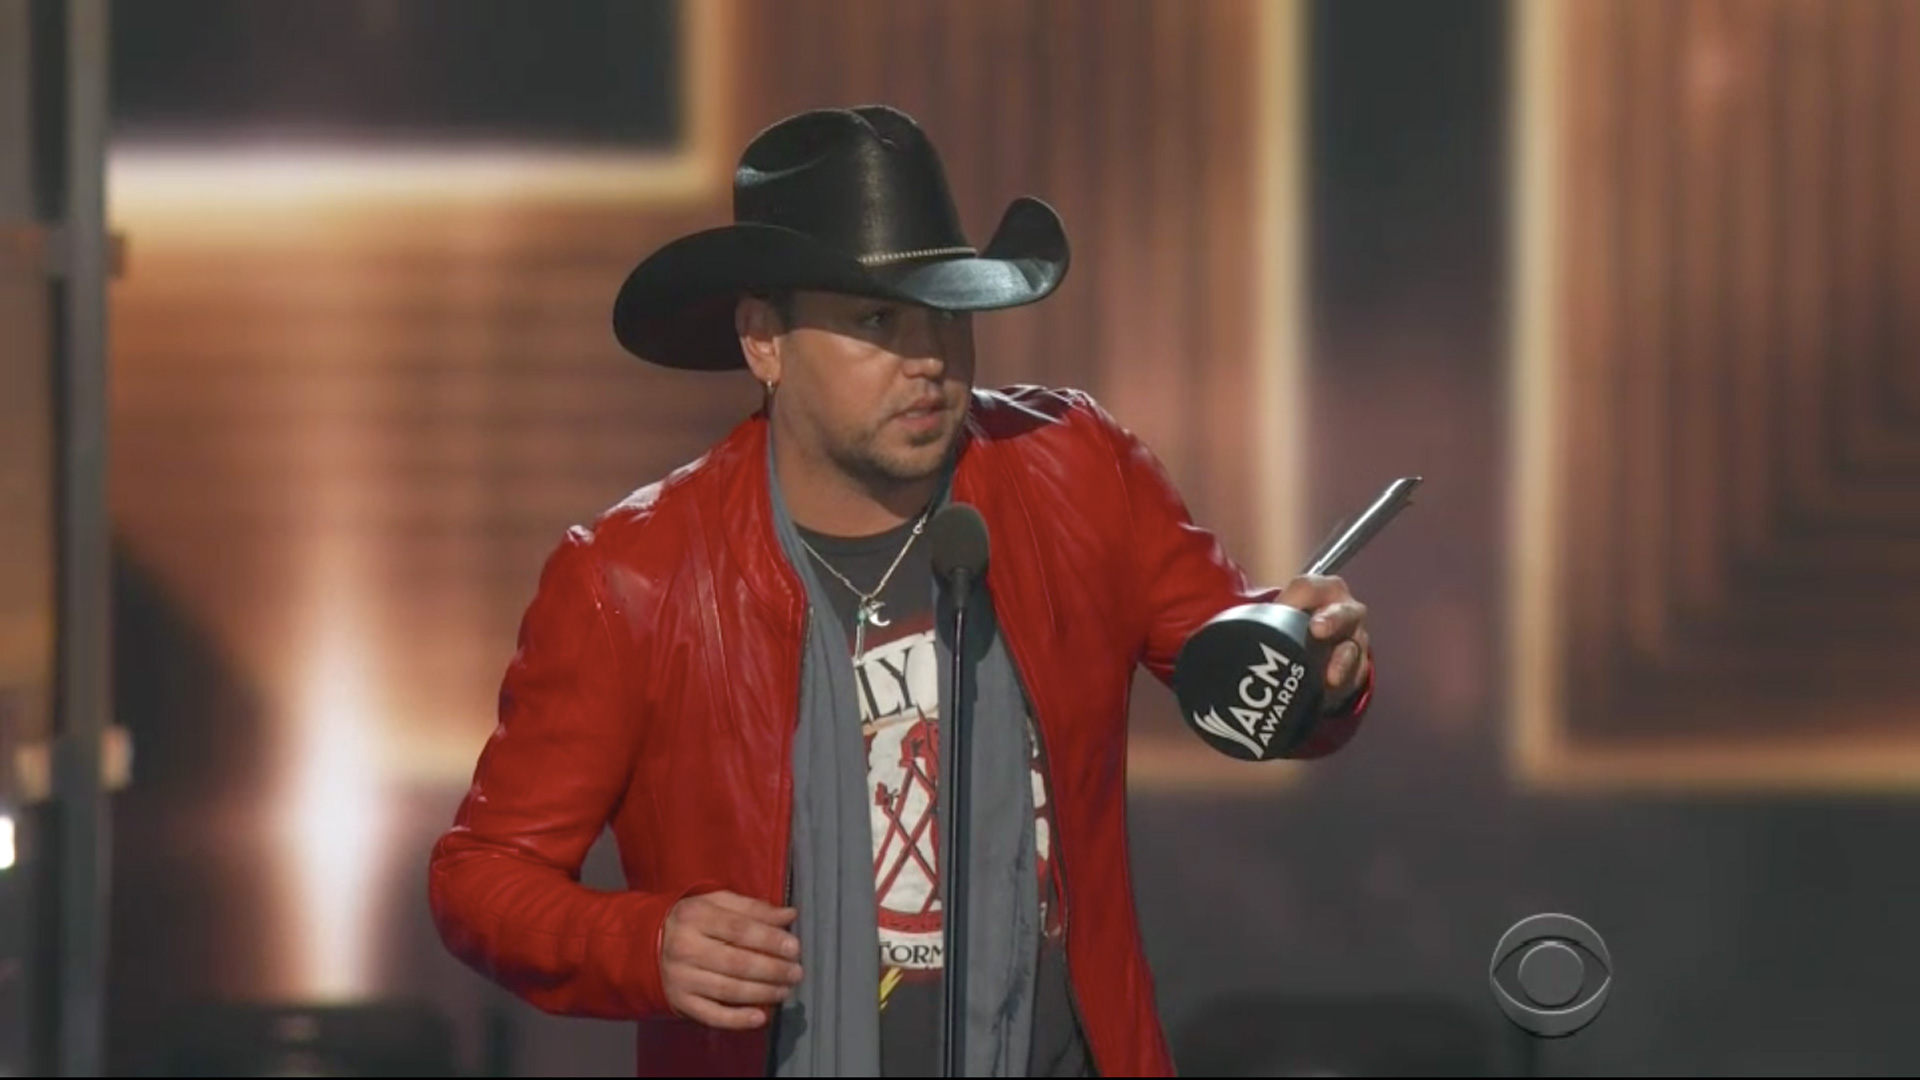 Jason Aldean wins Entertainer Of The Year at the 52nd ACM Awards